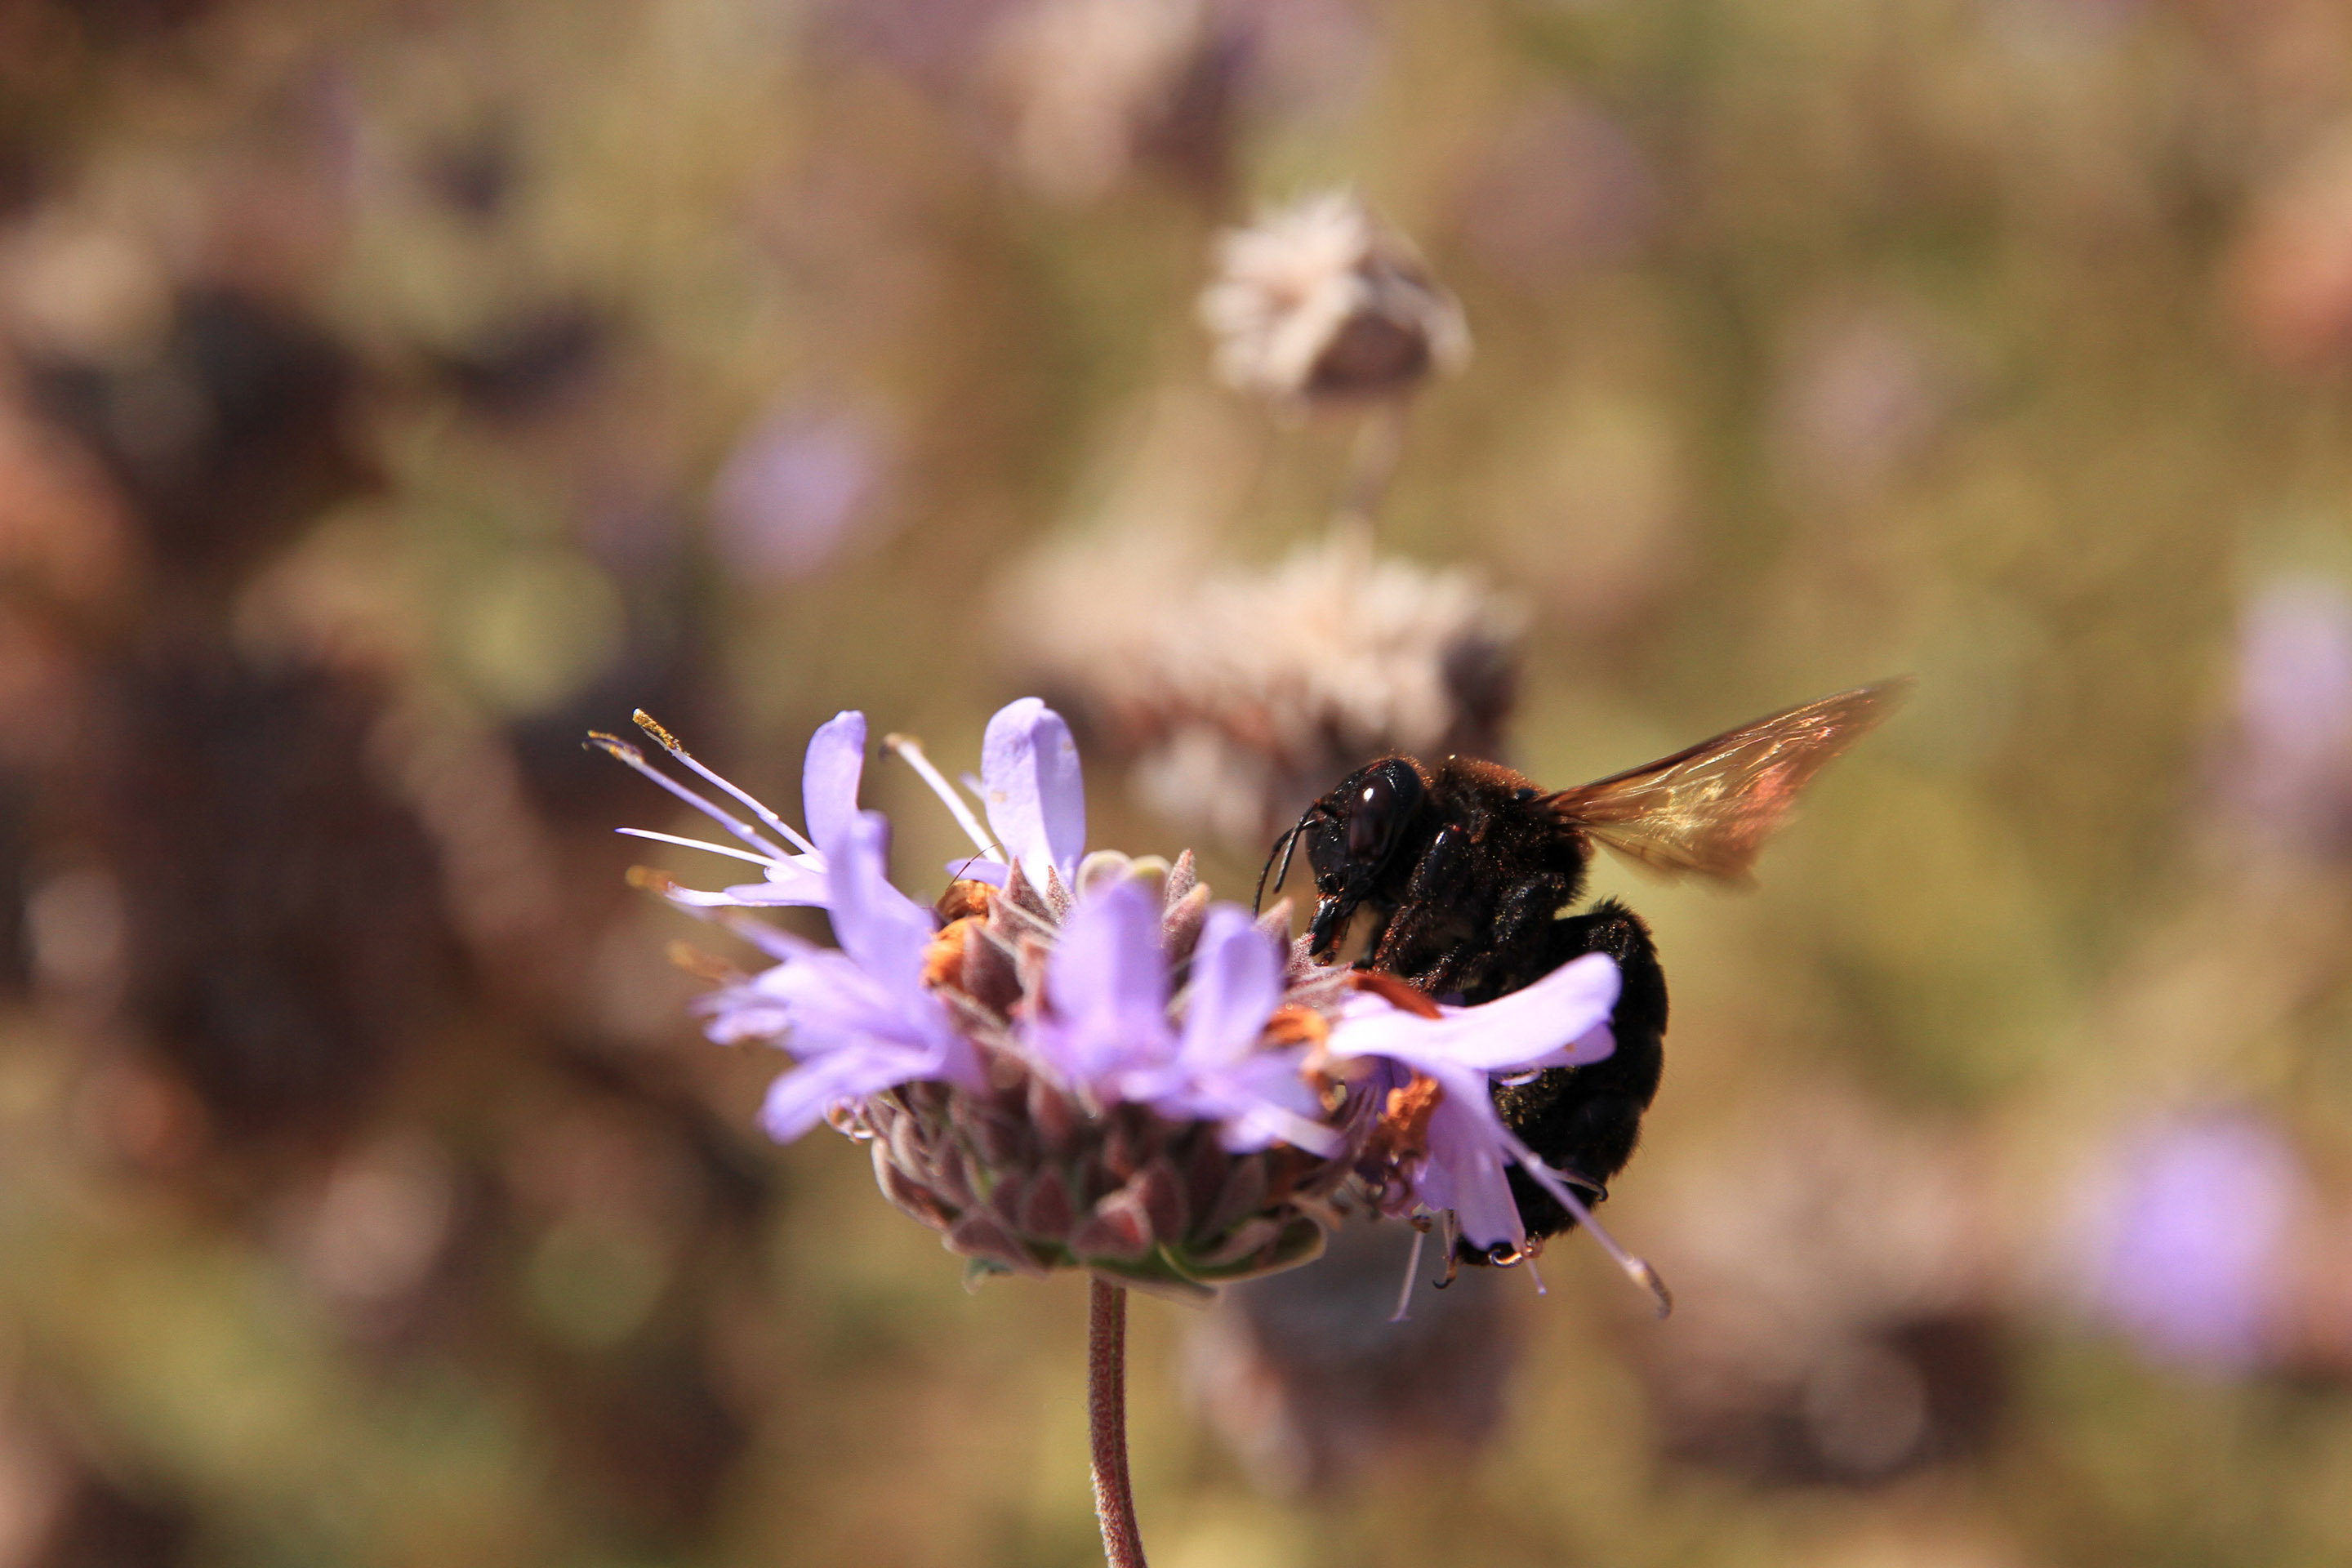 The black color of the California carpenter bee contrasts with the soft purple color of the sage flower on which it forages